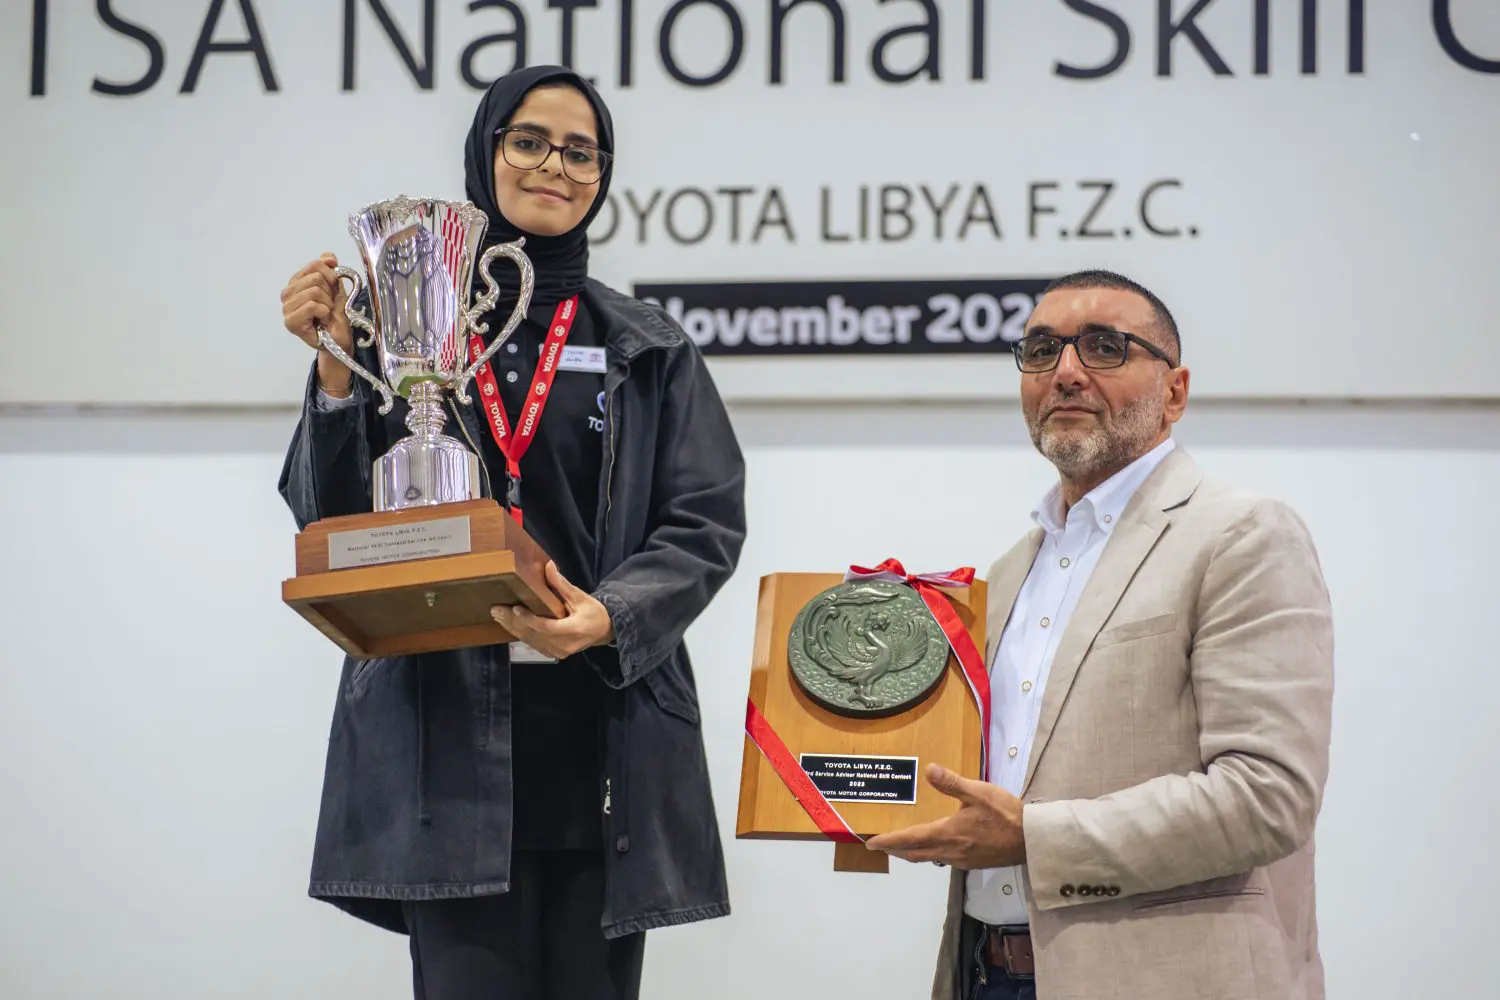 Toyota Libya’s Third National Competition